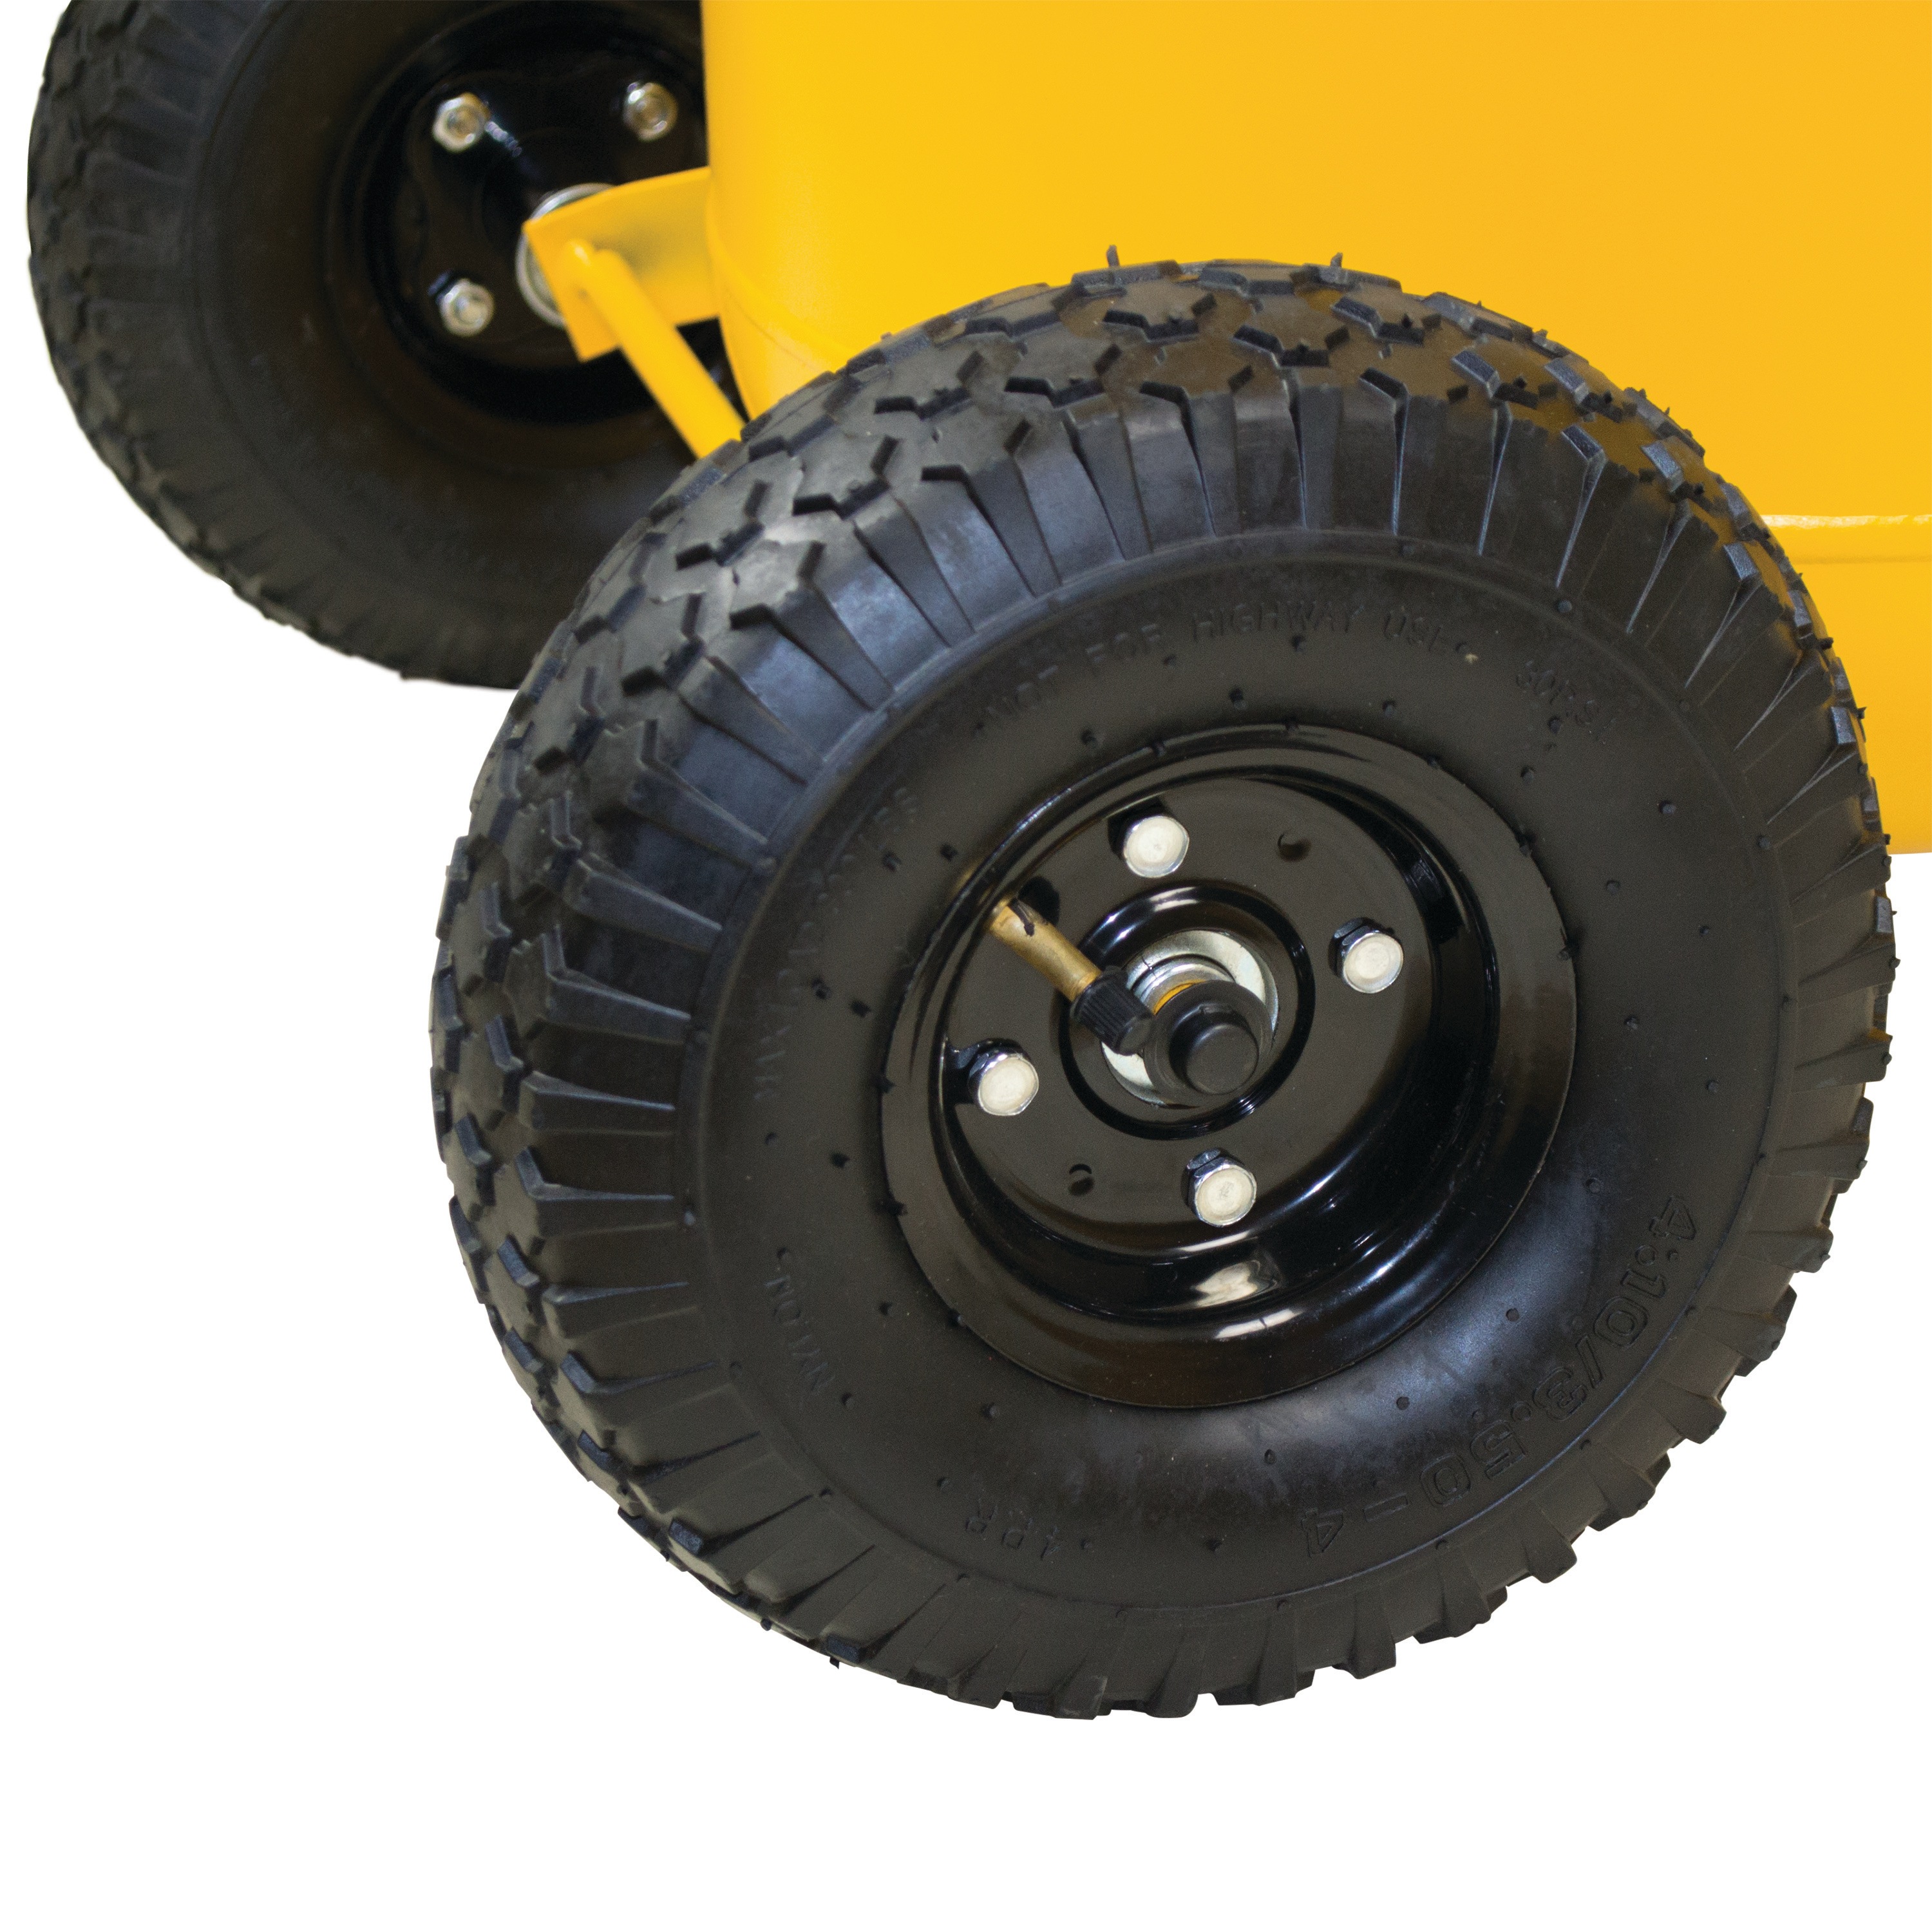 Pneumatic tire feature of 30 gallons Portable Electric Air Compressor. 